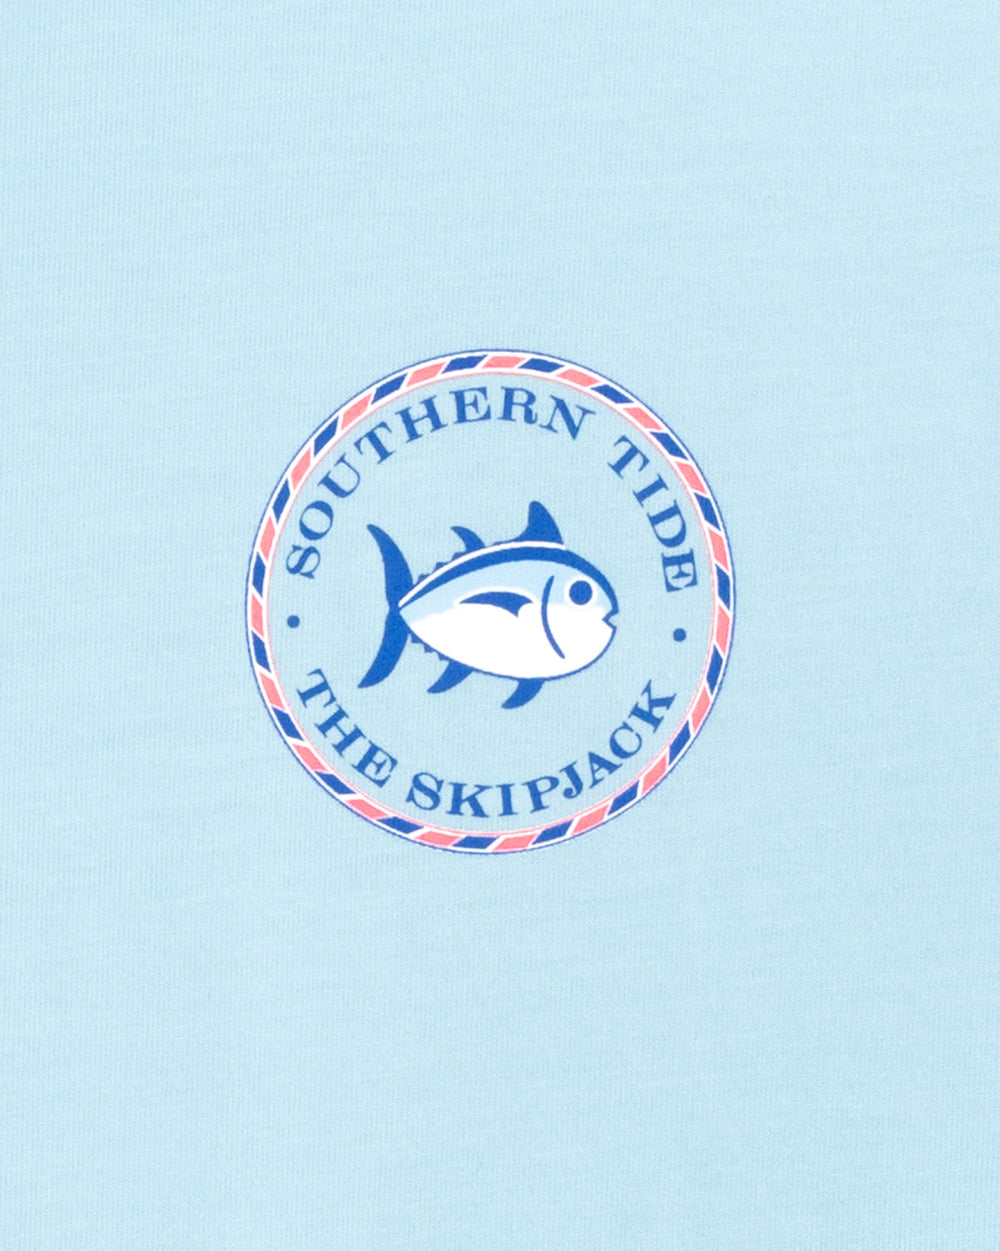 The model pocket view of the Women's Original Skipjack Medallion T-Shirt by Southern Tide - Dream Blue